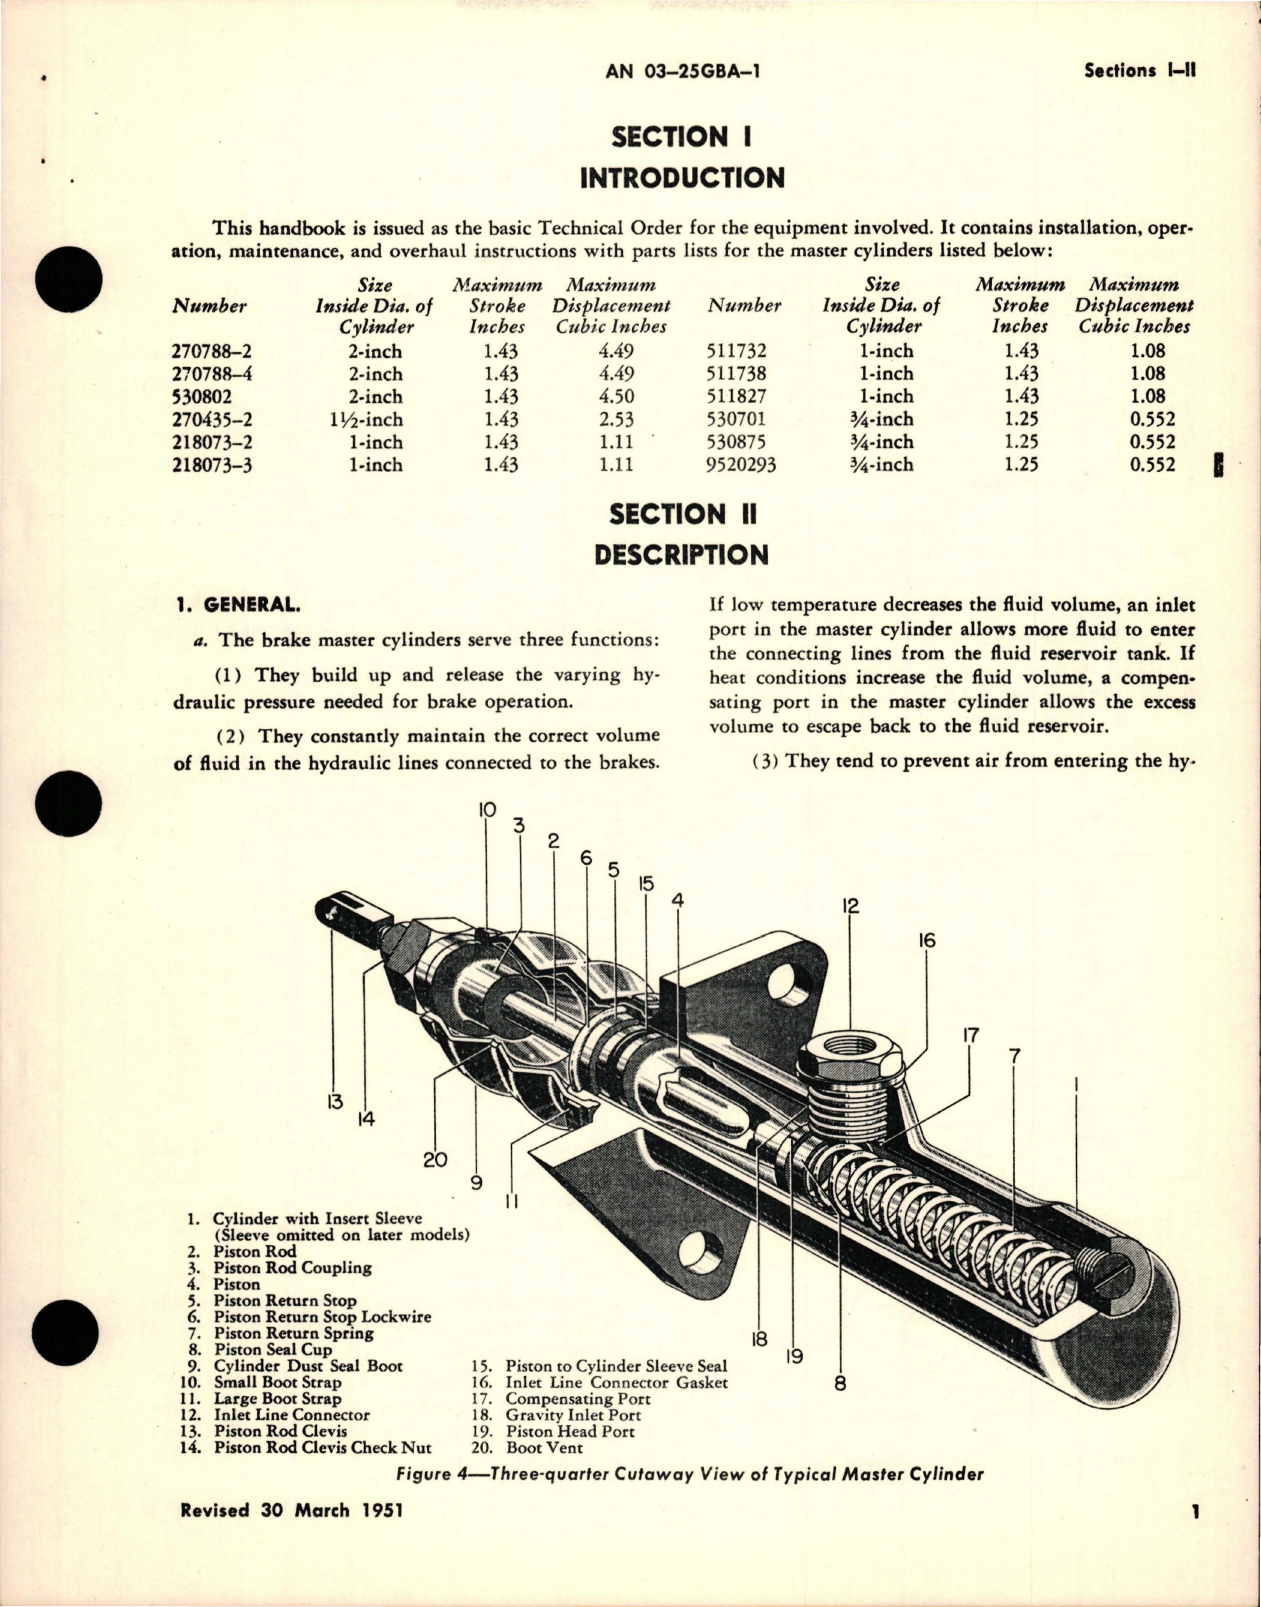 Sample page 7 from AirCorps Library document: Operation, Service and Overhaul Instructions with Parts Catalog for Master Brake Cylinders